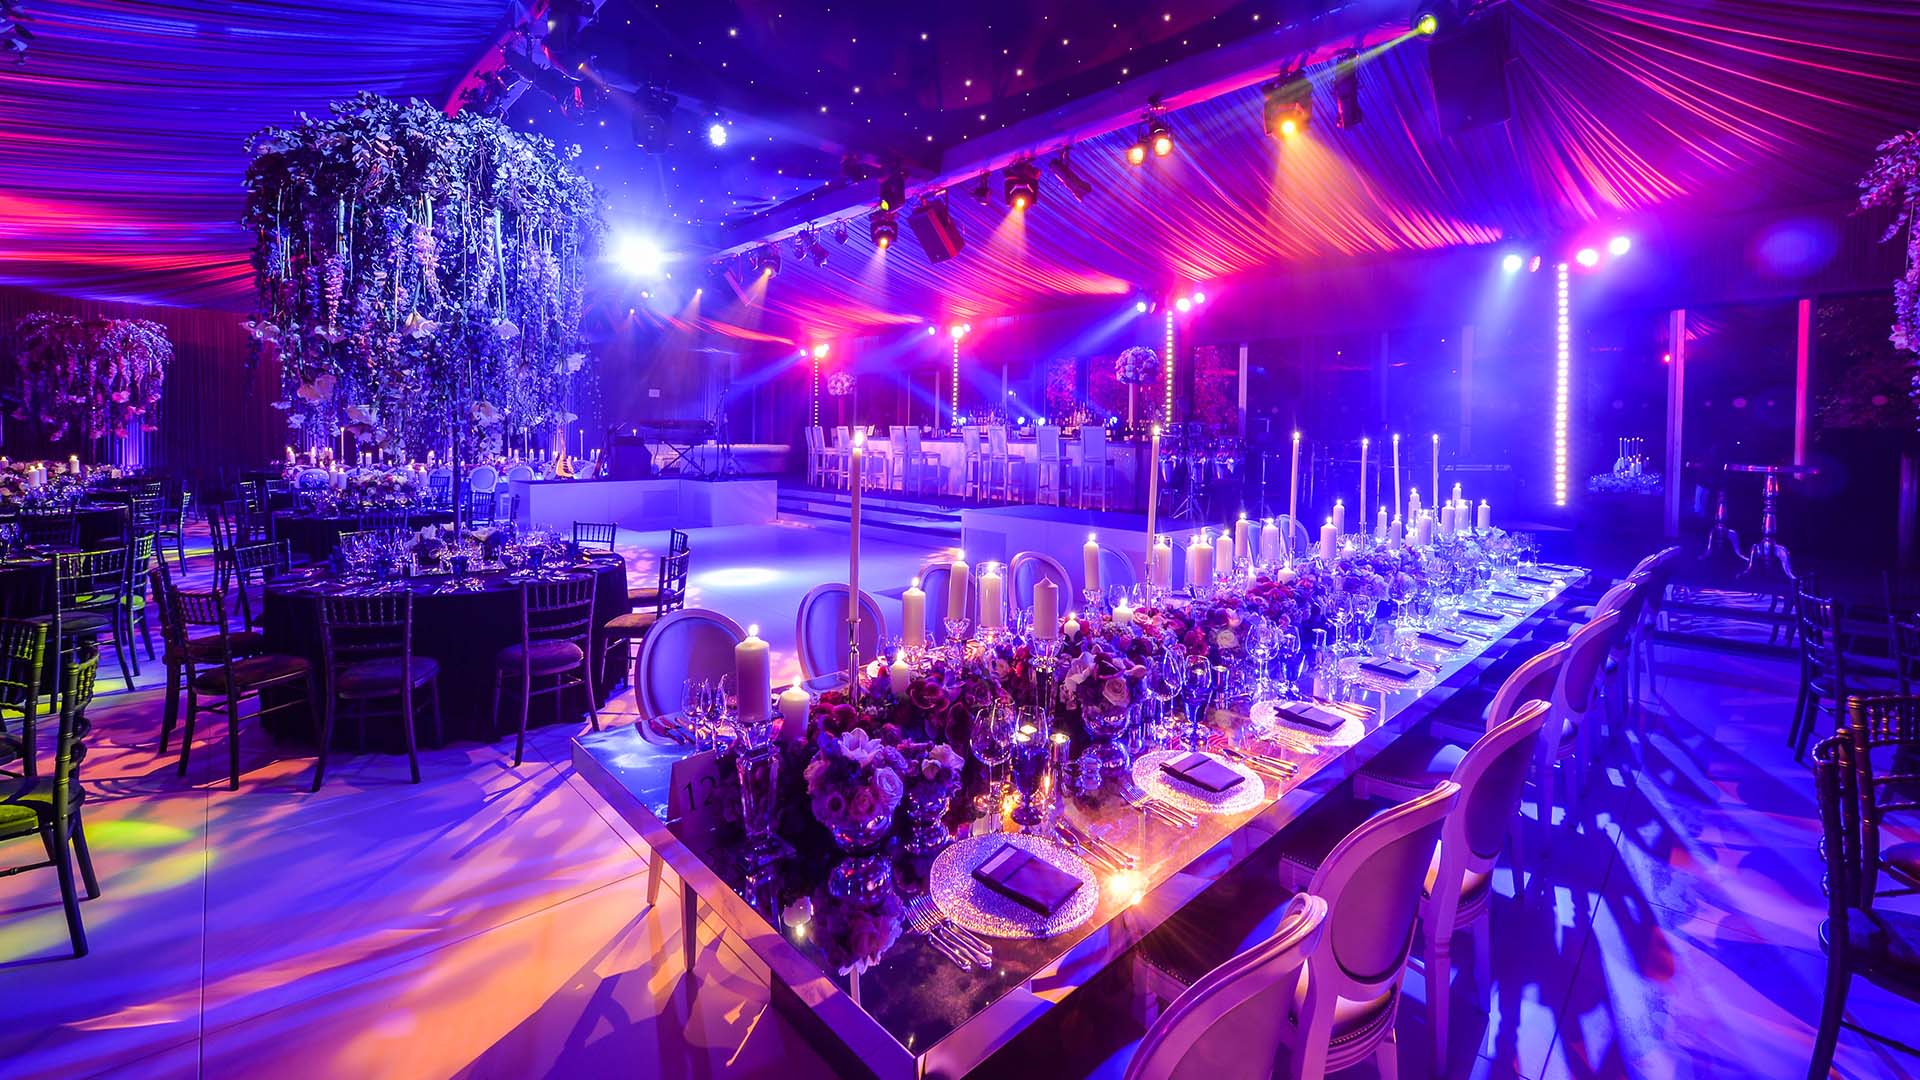 tlc ltd the taylor Lynn corporation Private party planners in heshire